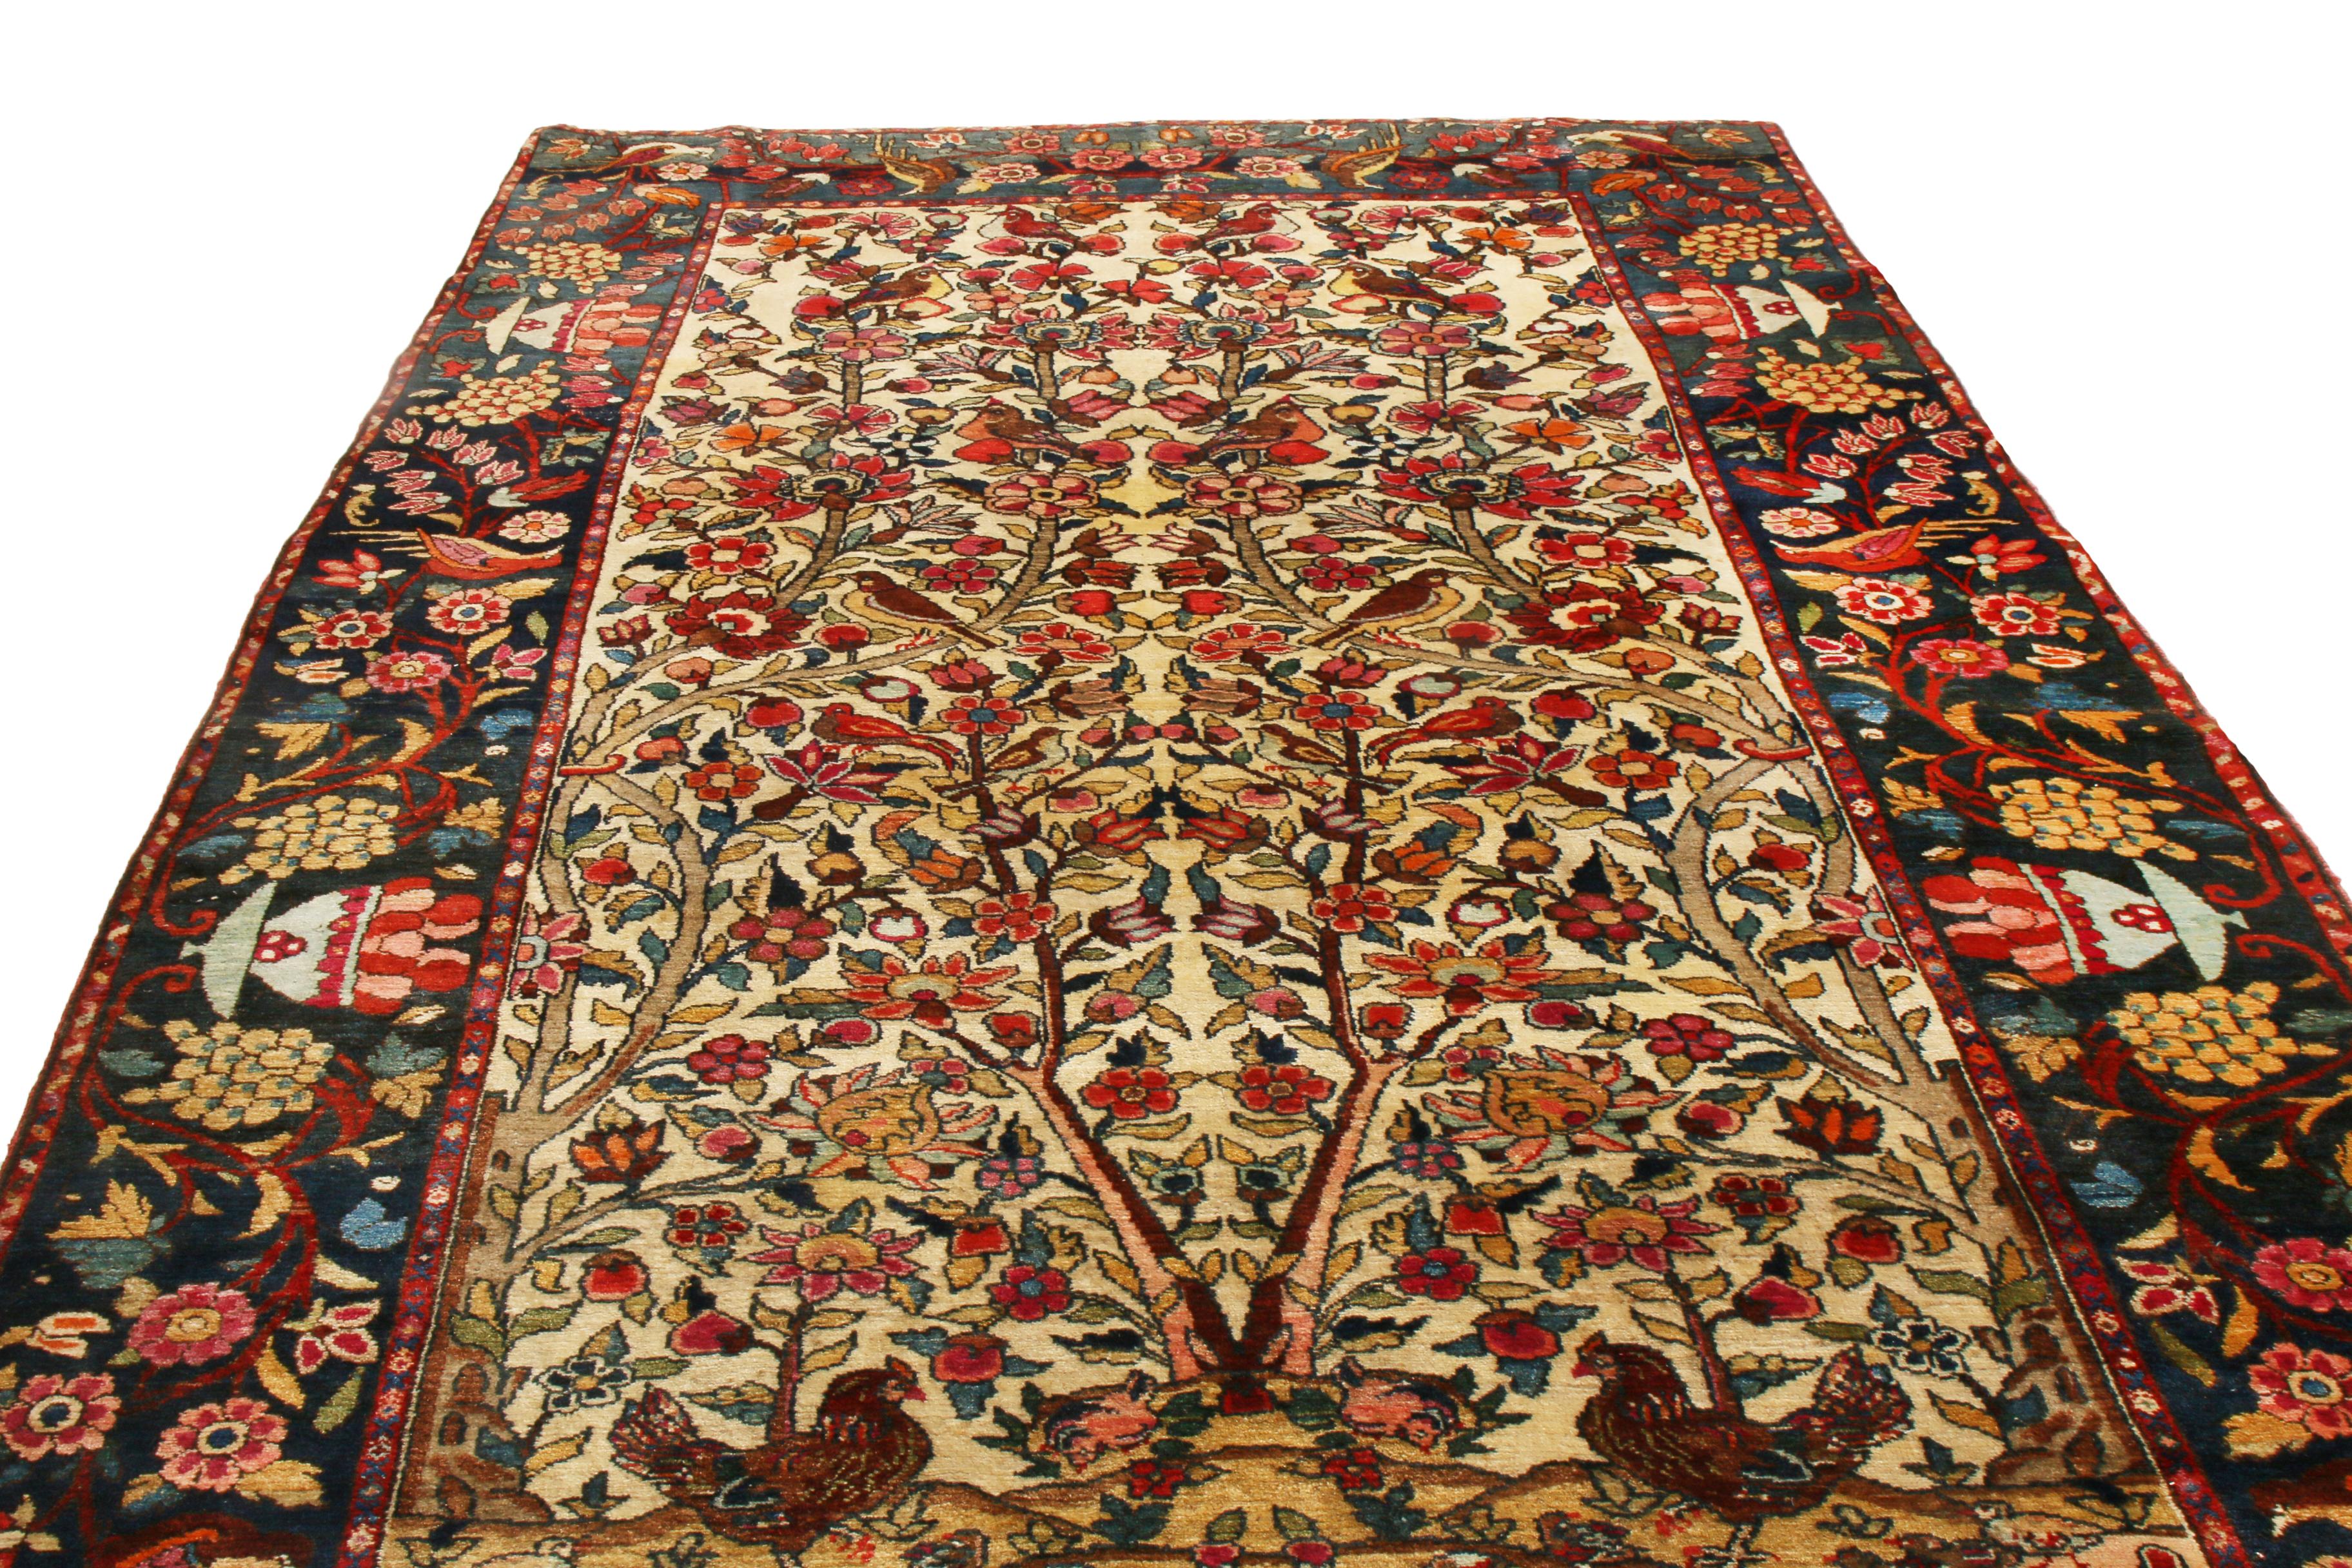 Originating from Persia between 1880-1890, this antique traditional Bakhtiari Persian rug enjoys one of the most highly stylized all over patterns of its era. Hand knotted in high quality, luminous wool, the field and border alike portray a series